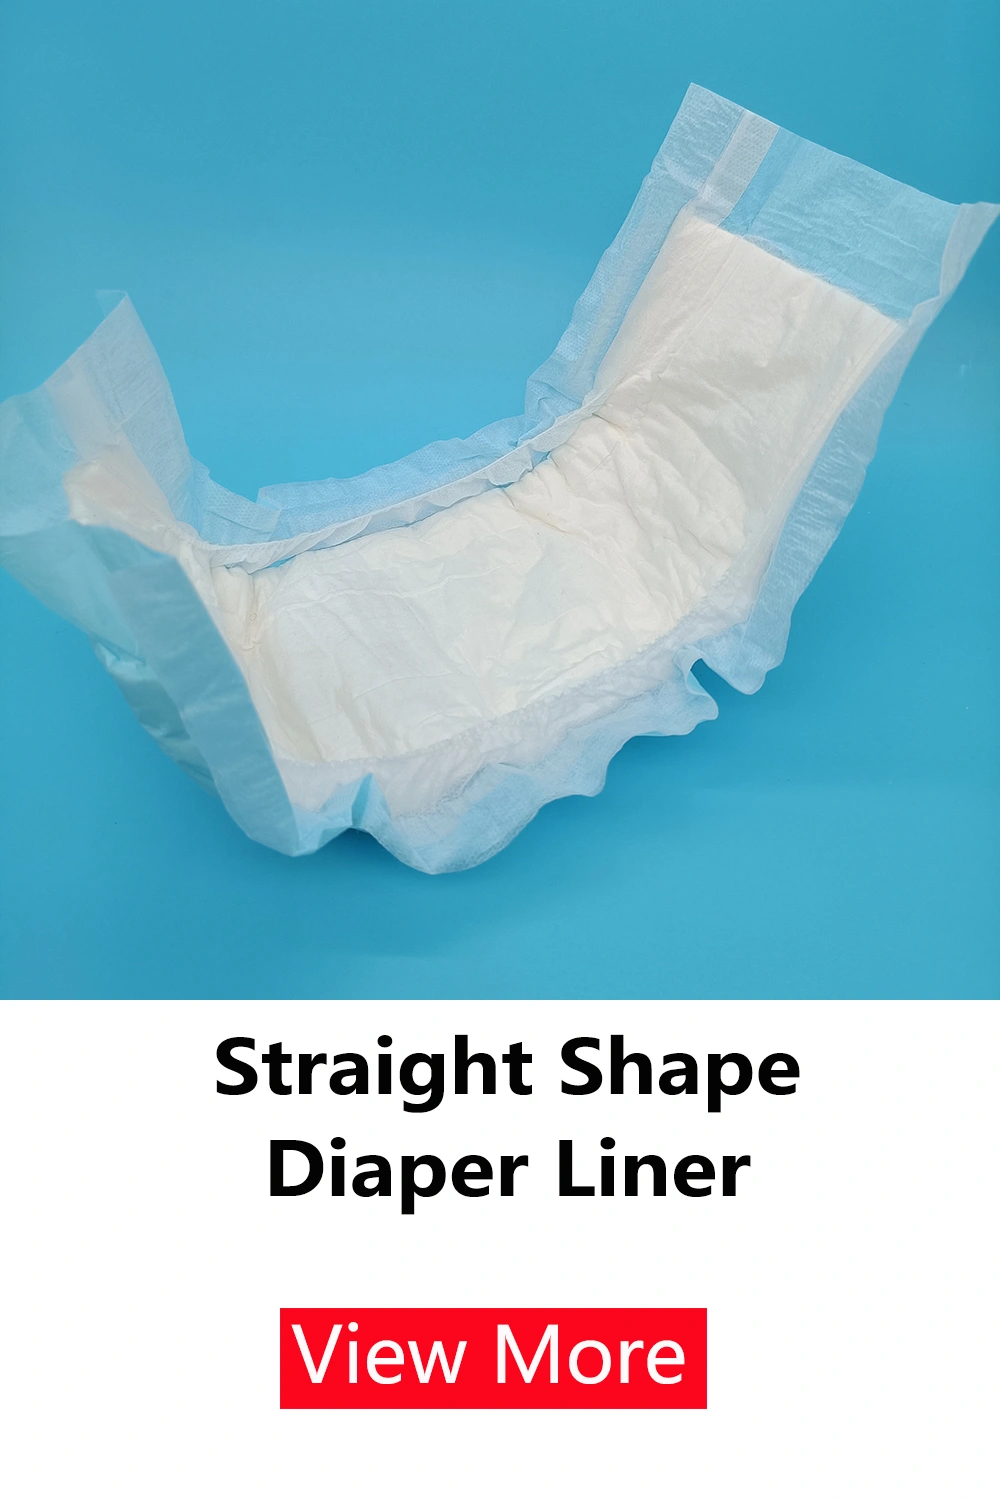 Bed pad related product straight shape diaper liner picture